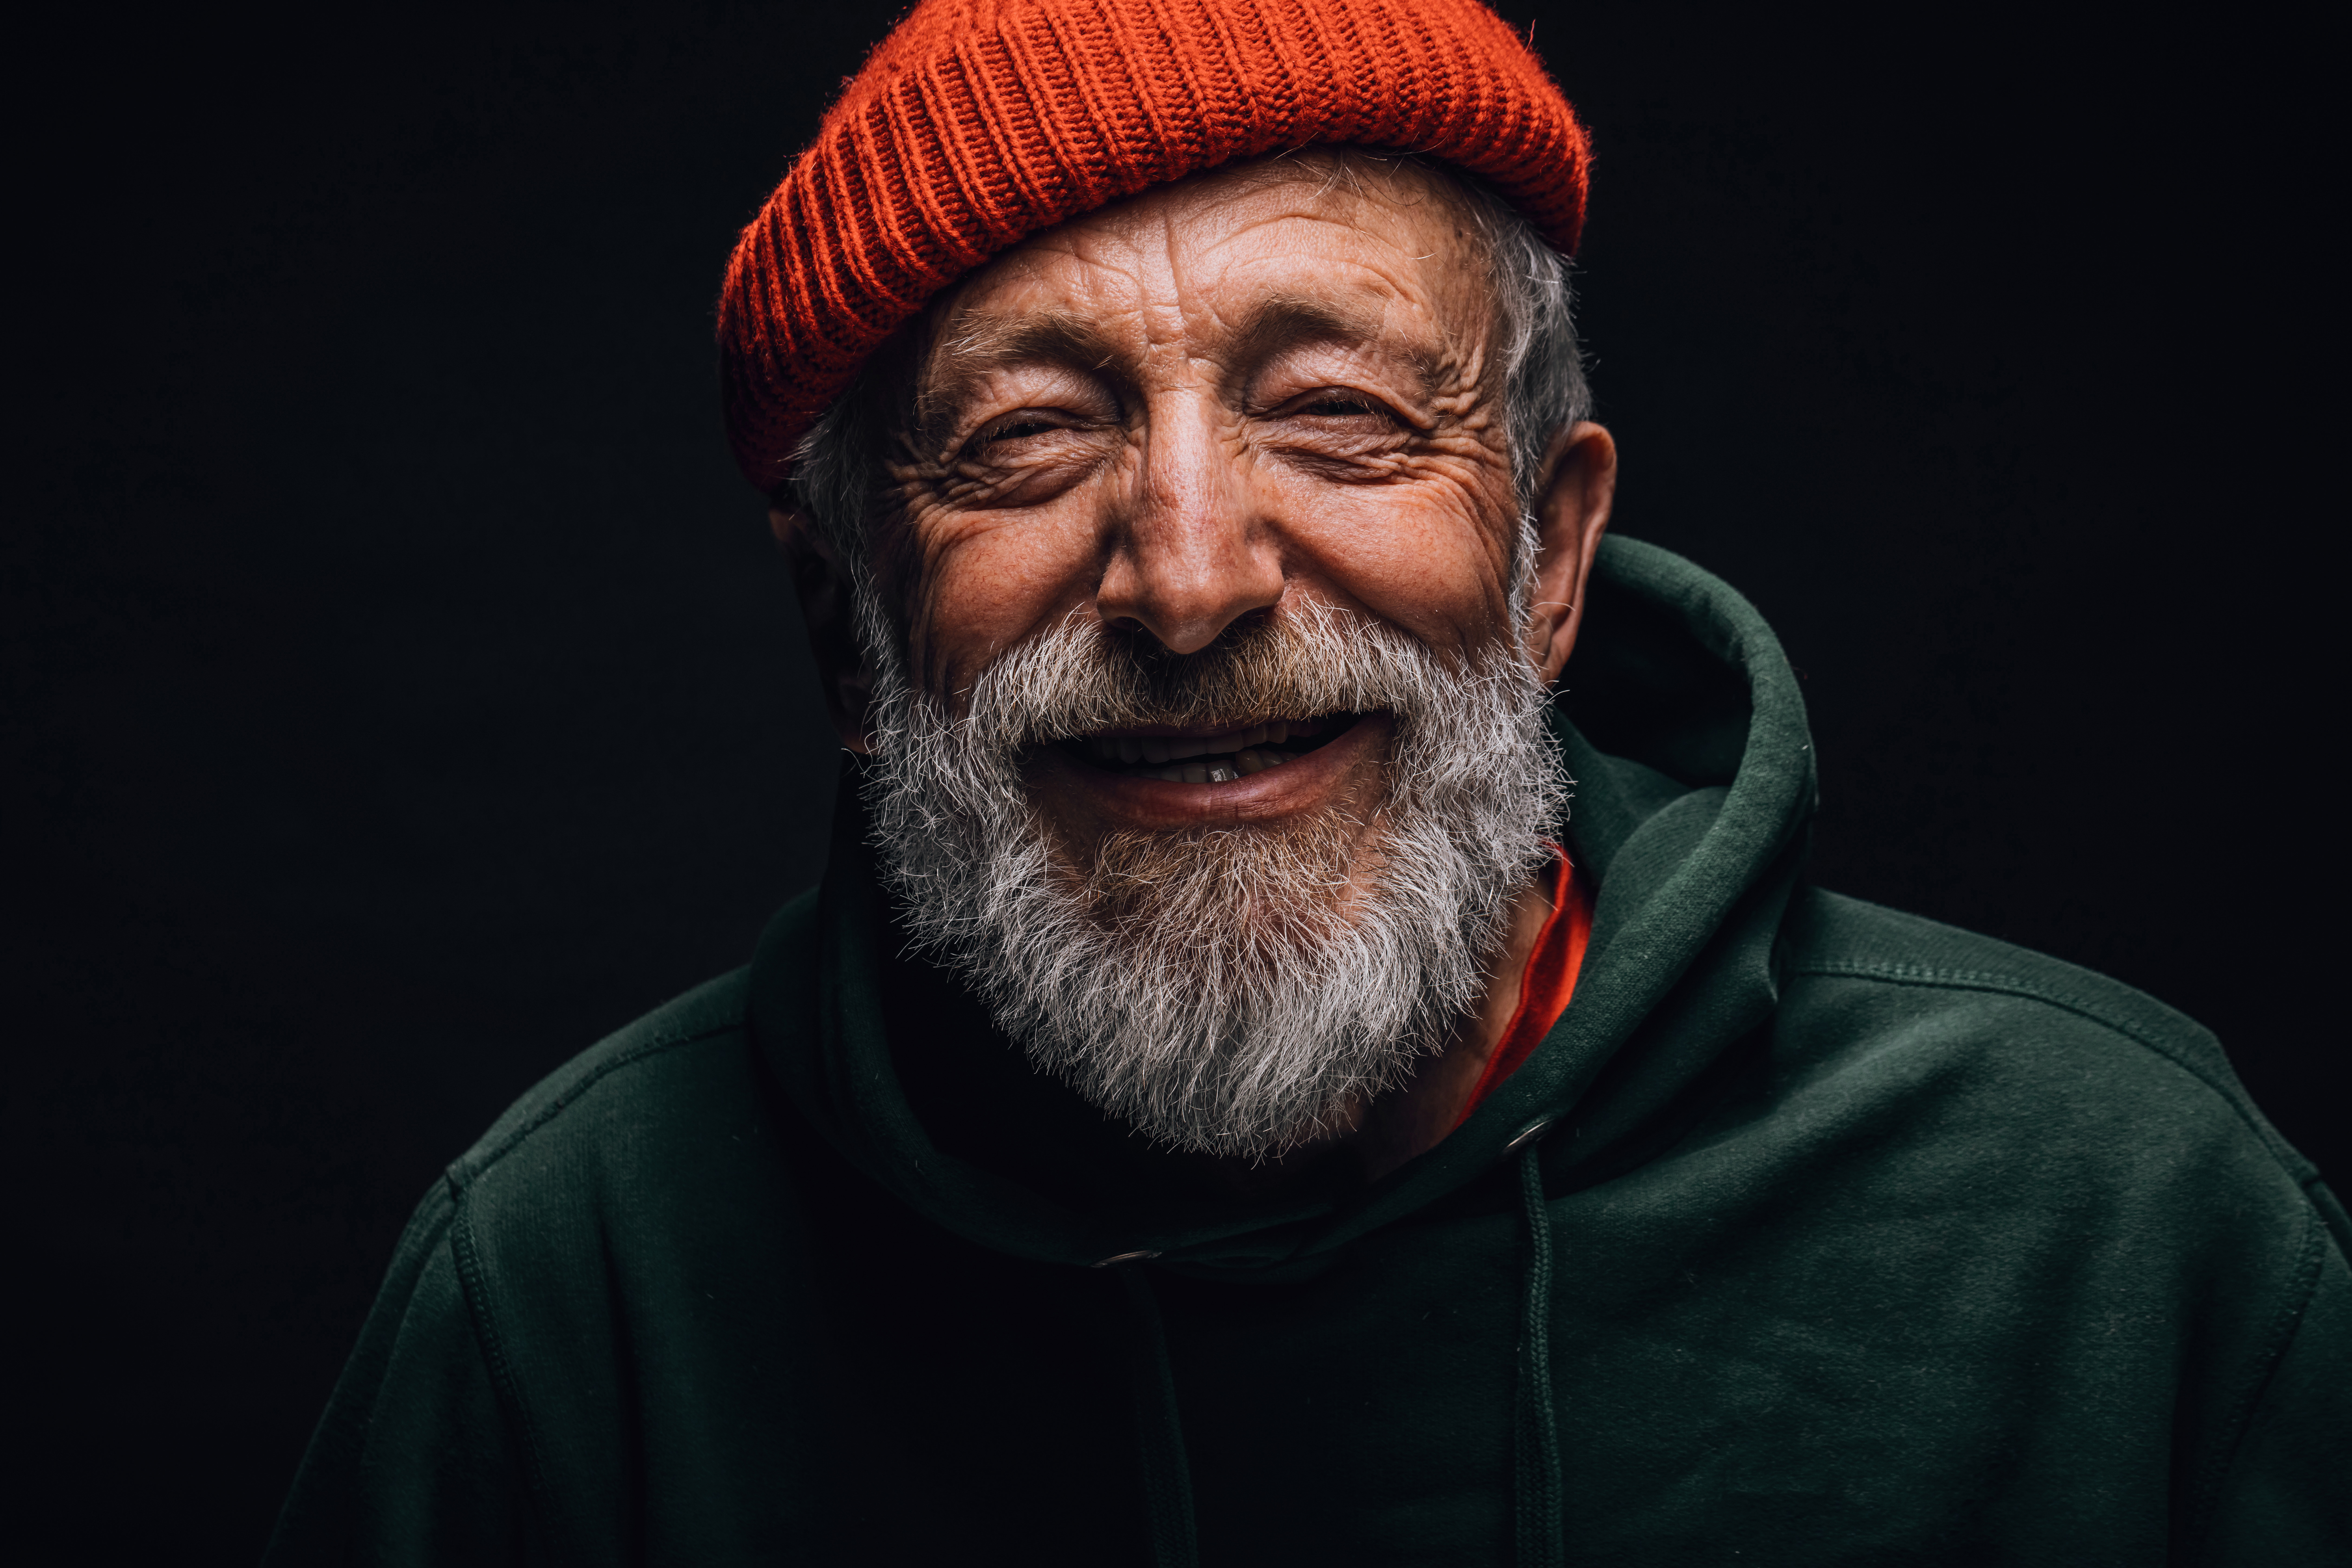 Old man wearing a red beannie and smiling